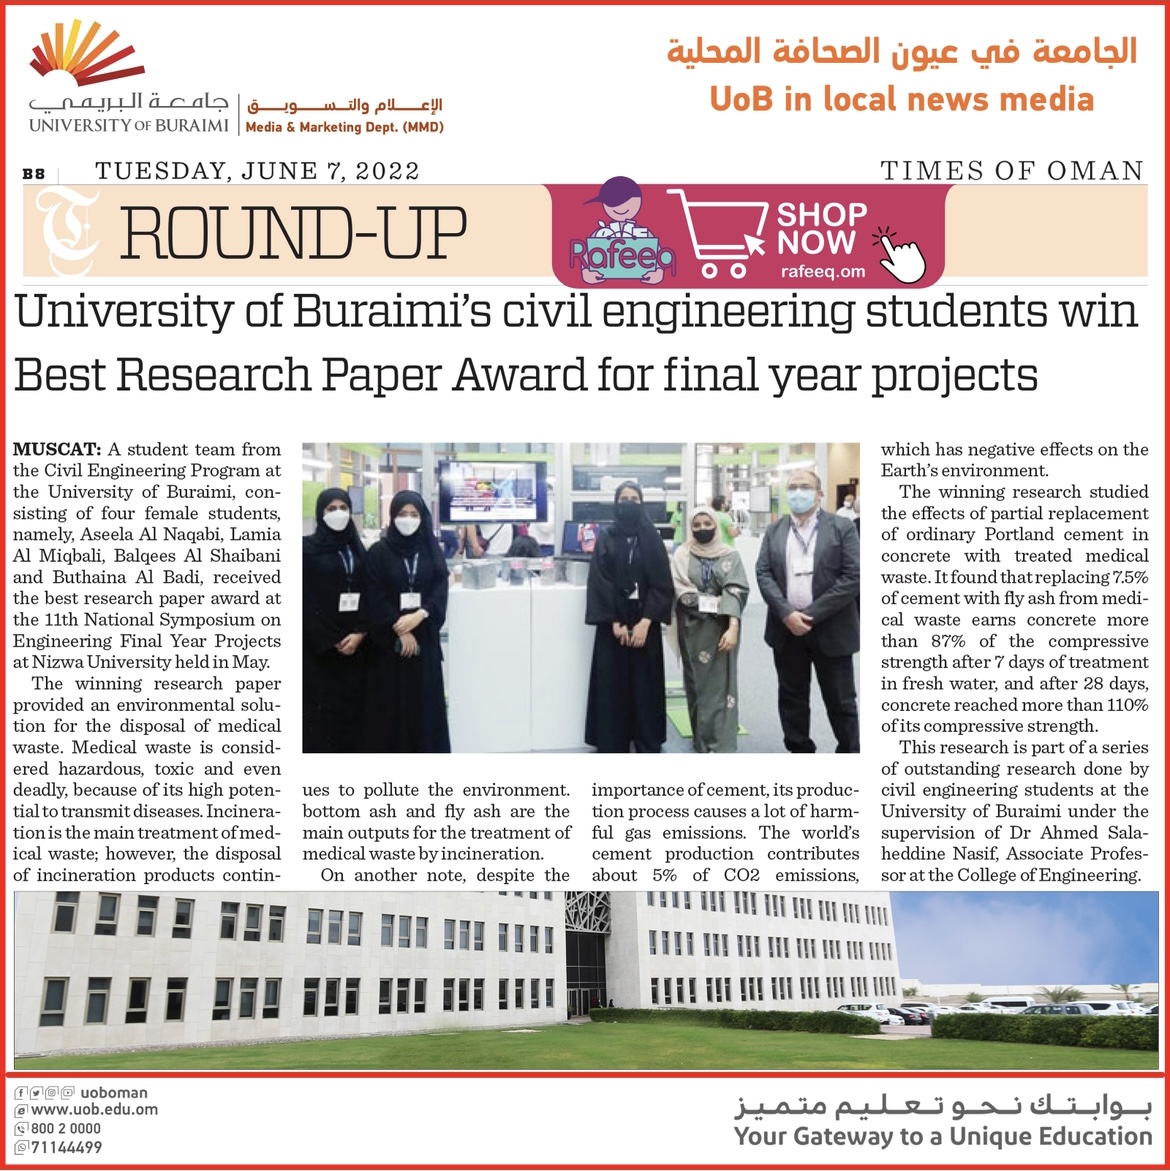 University of Buraimi's civil engineering students win Best Research Paper Award for final year projects